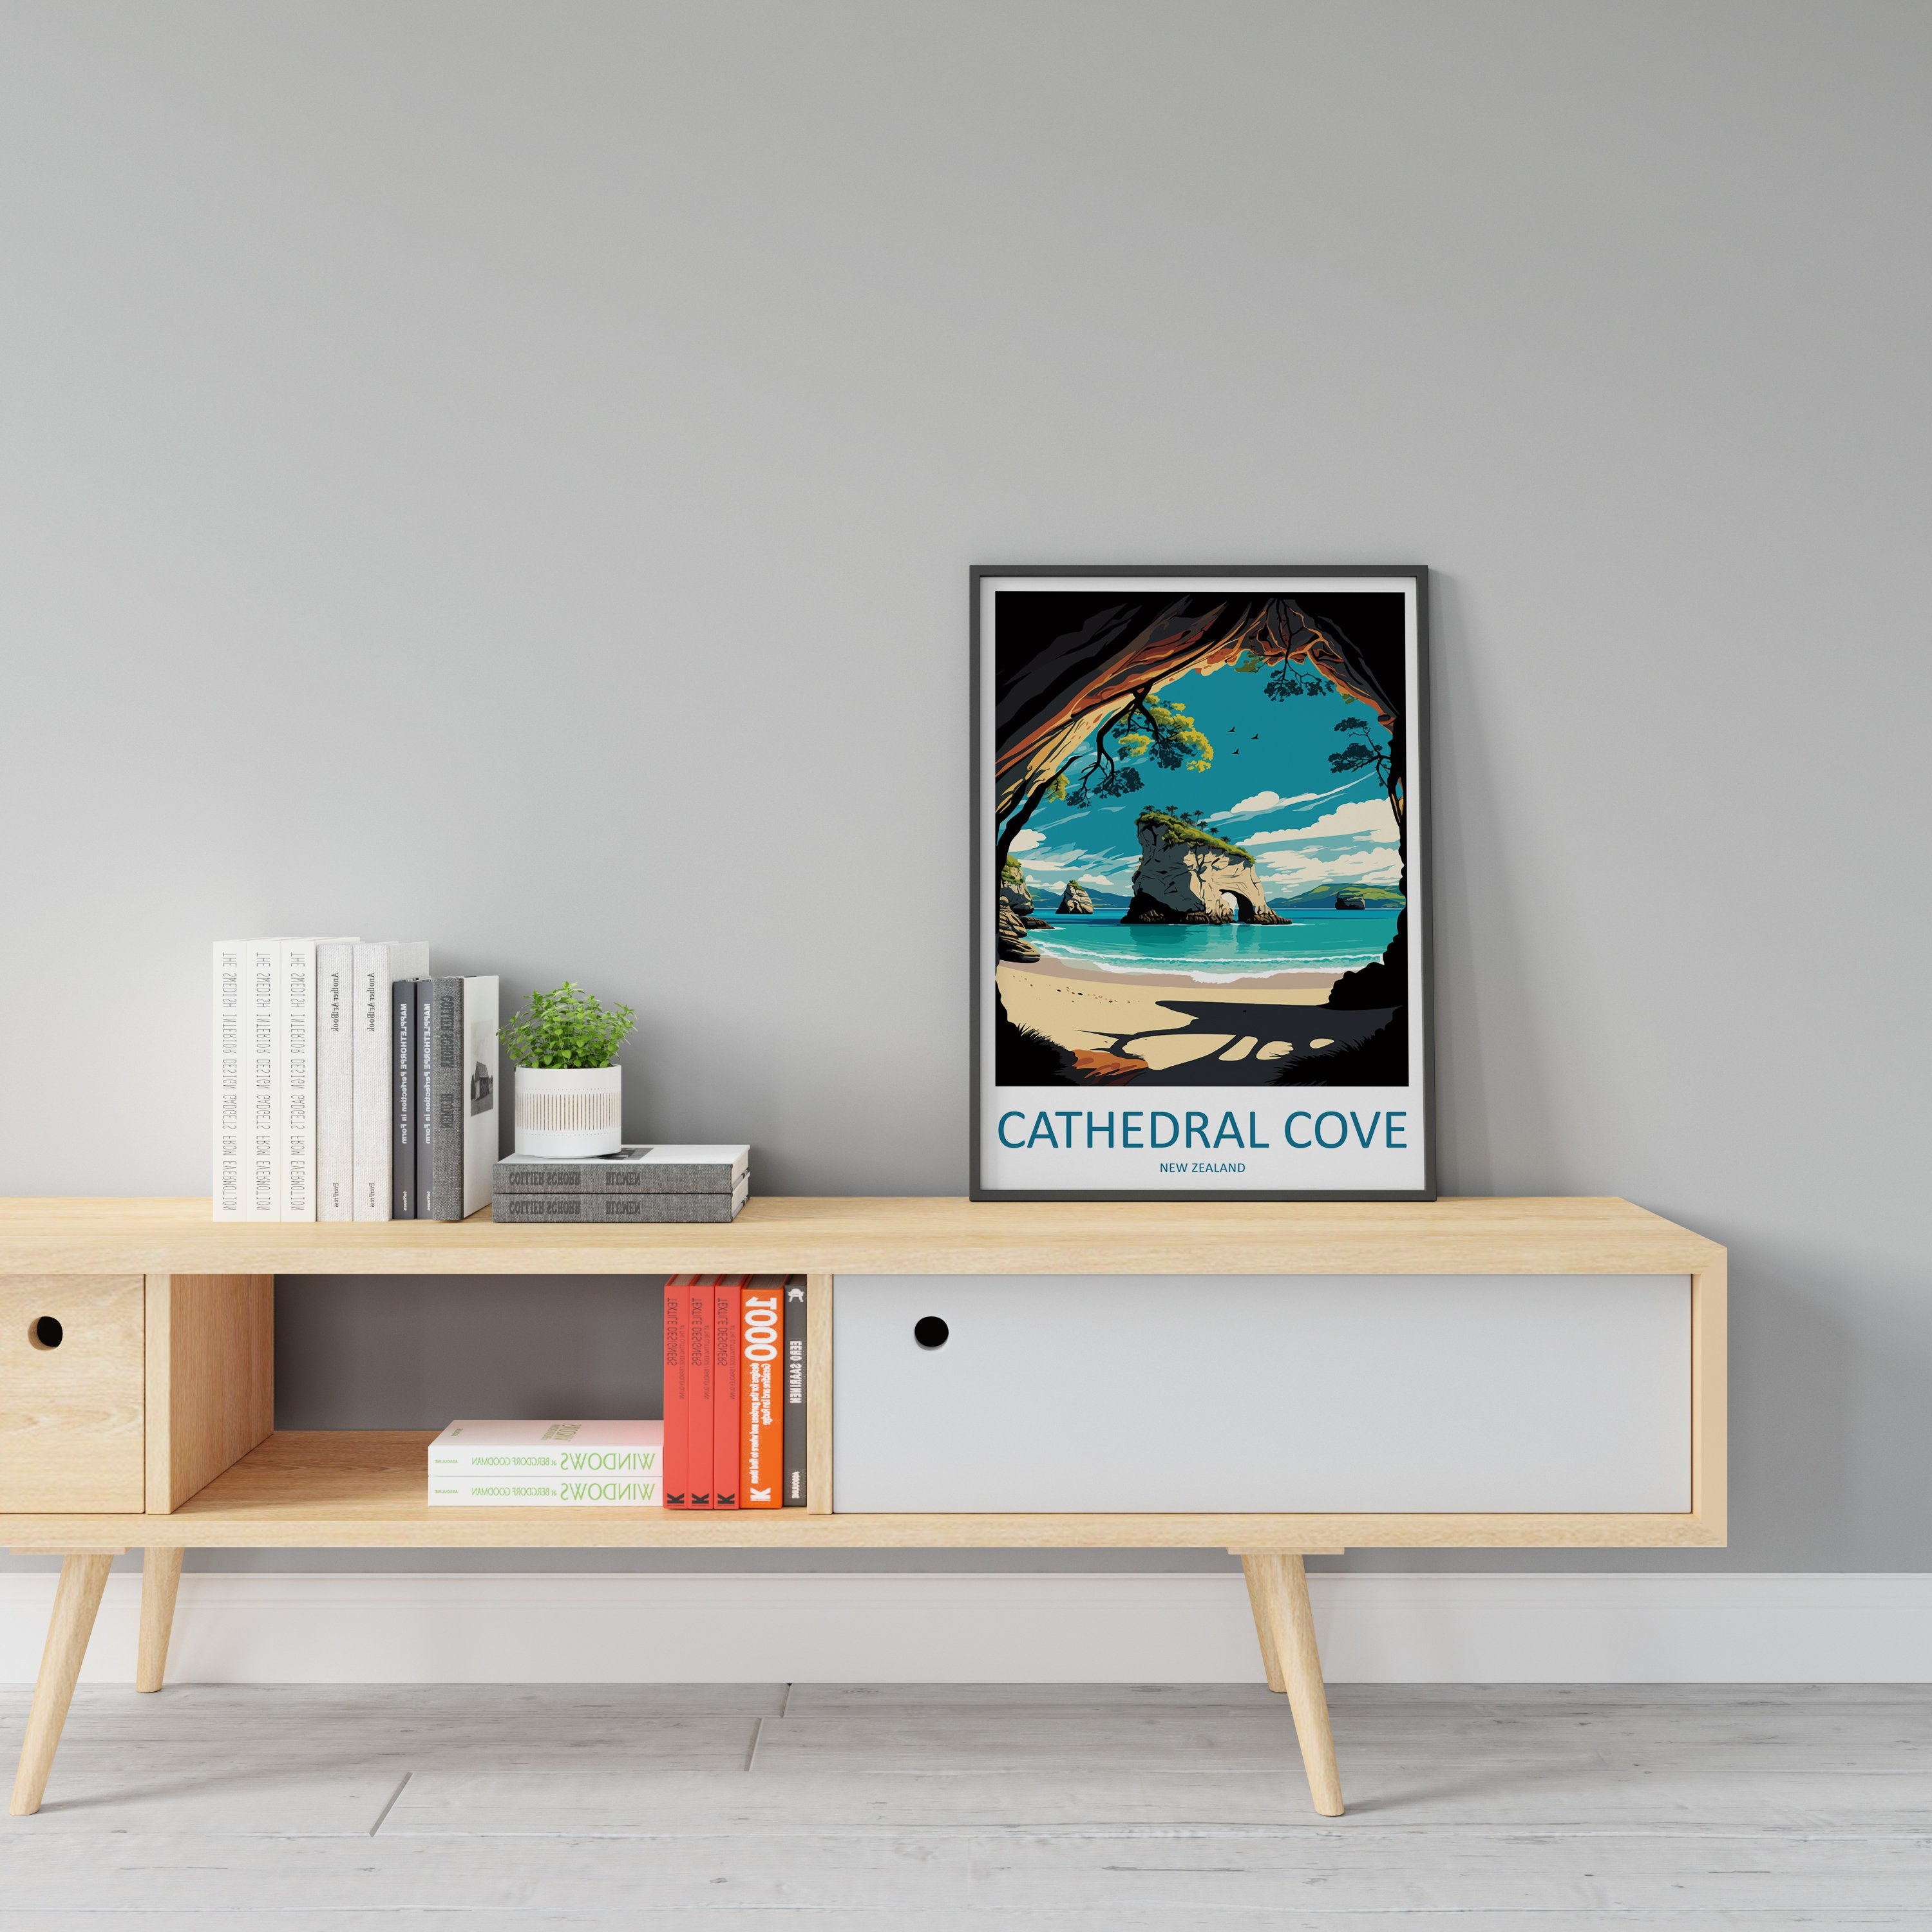 Cathedral Cove Travel Print Wall Art Cathedral Cove Wall Hanging Home Décor Cathedral Cove Gift Art Lovers New Zealand Art Lover Gift Print